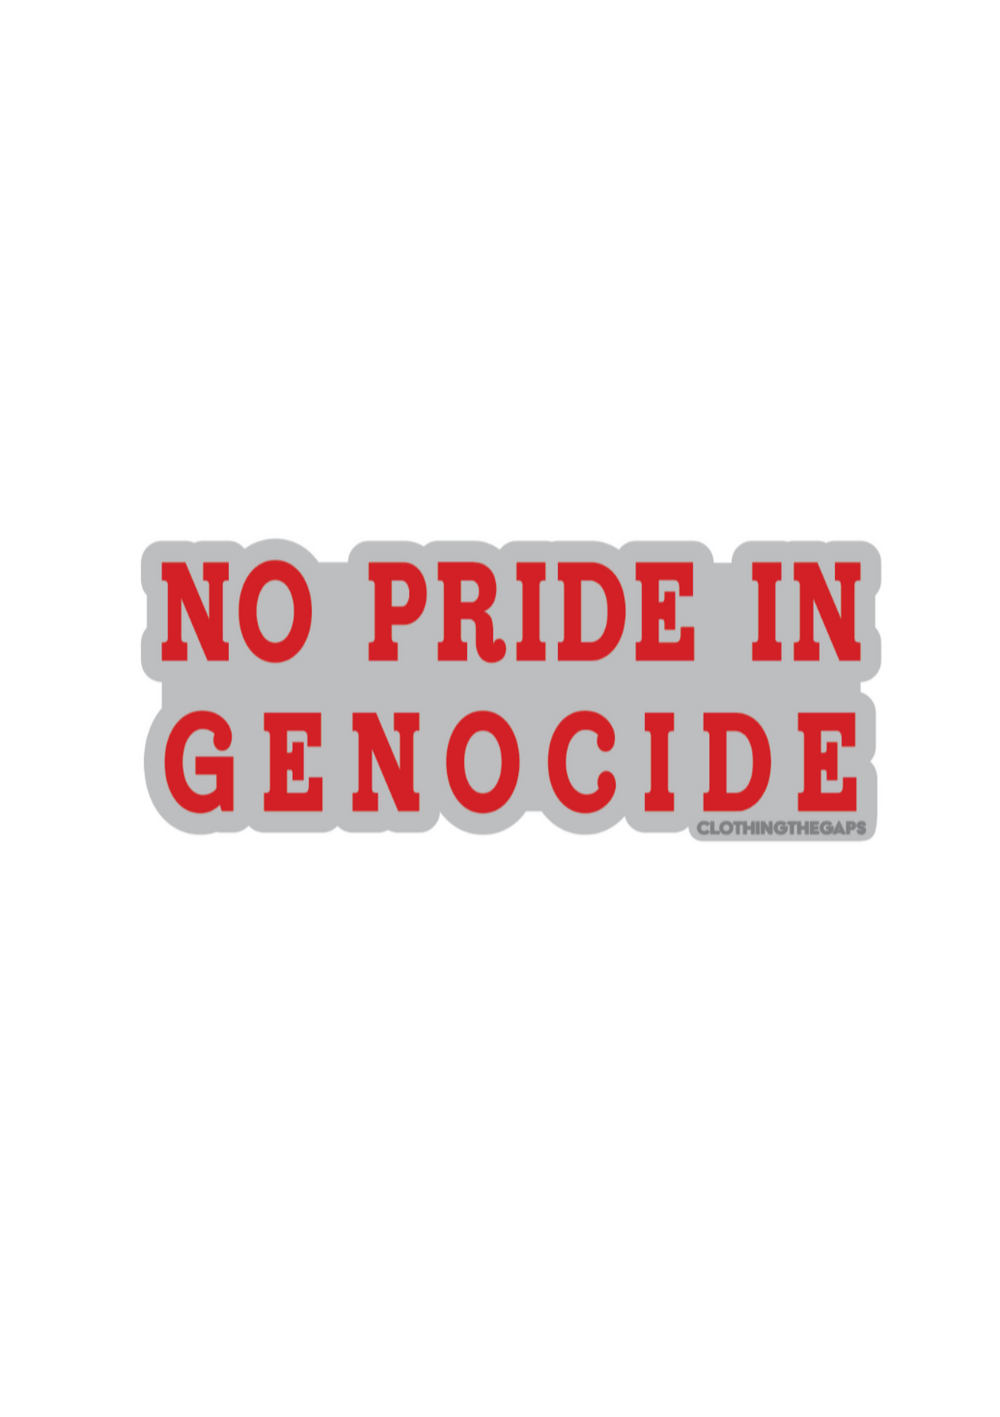 No pride in genocide pin clothing the gapss